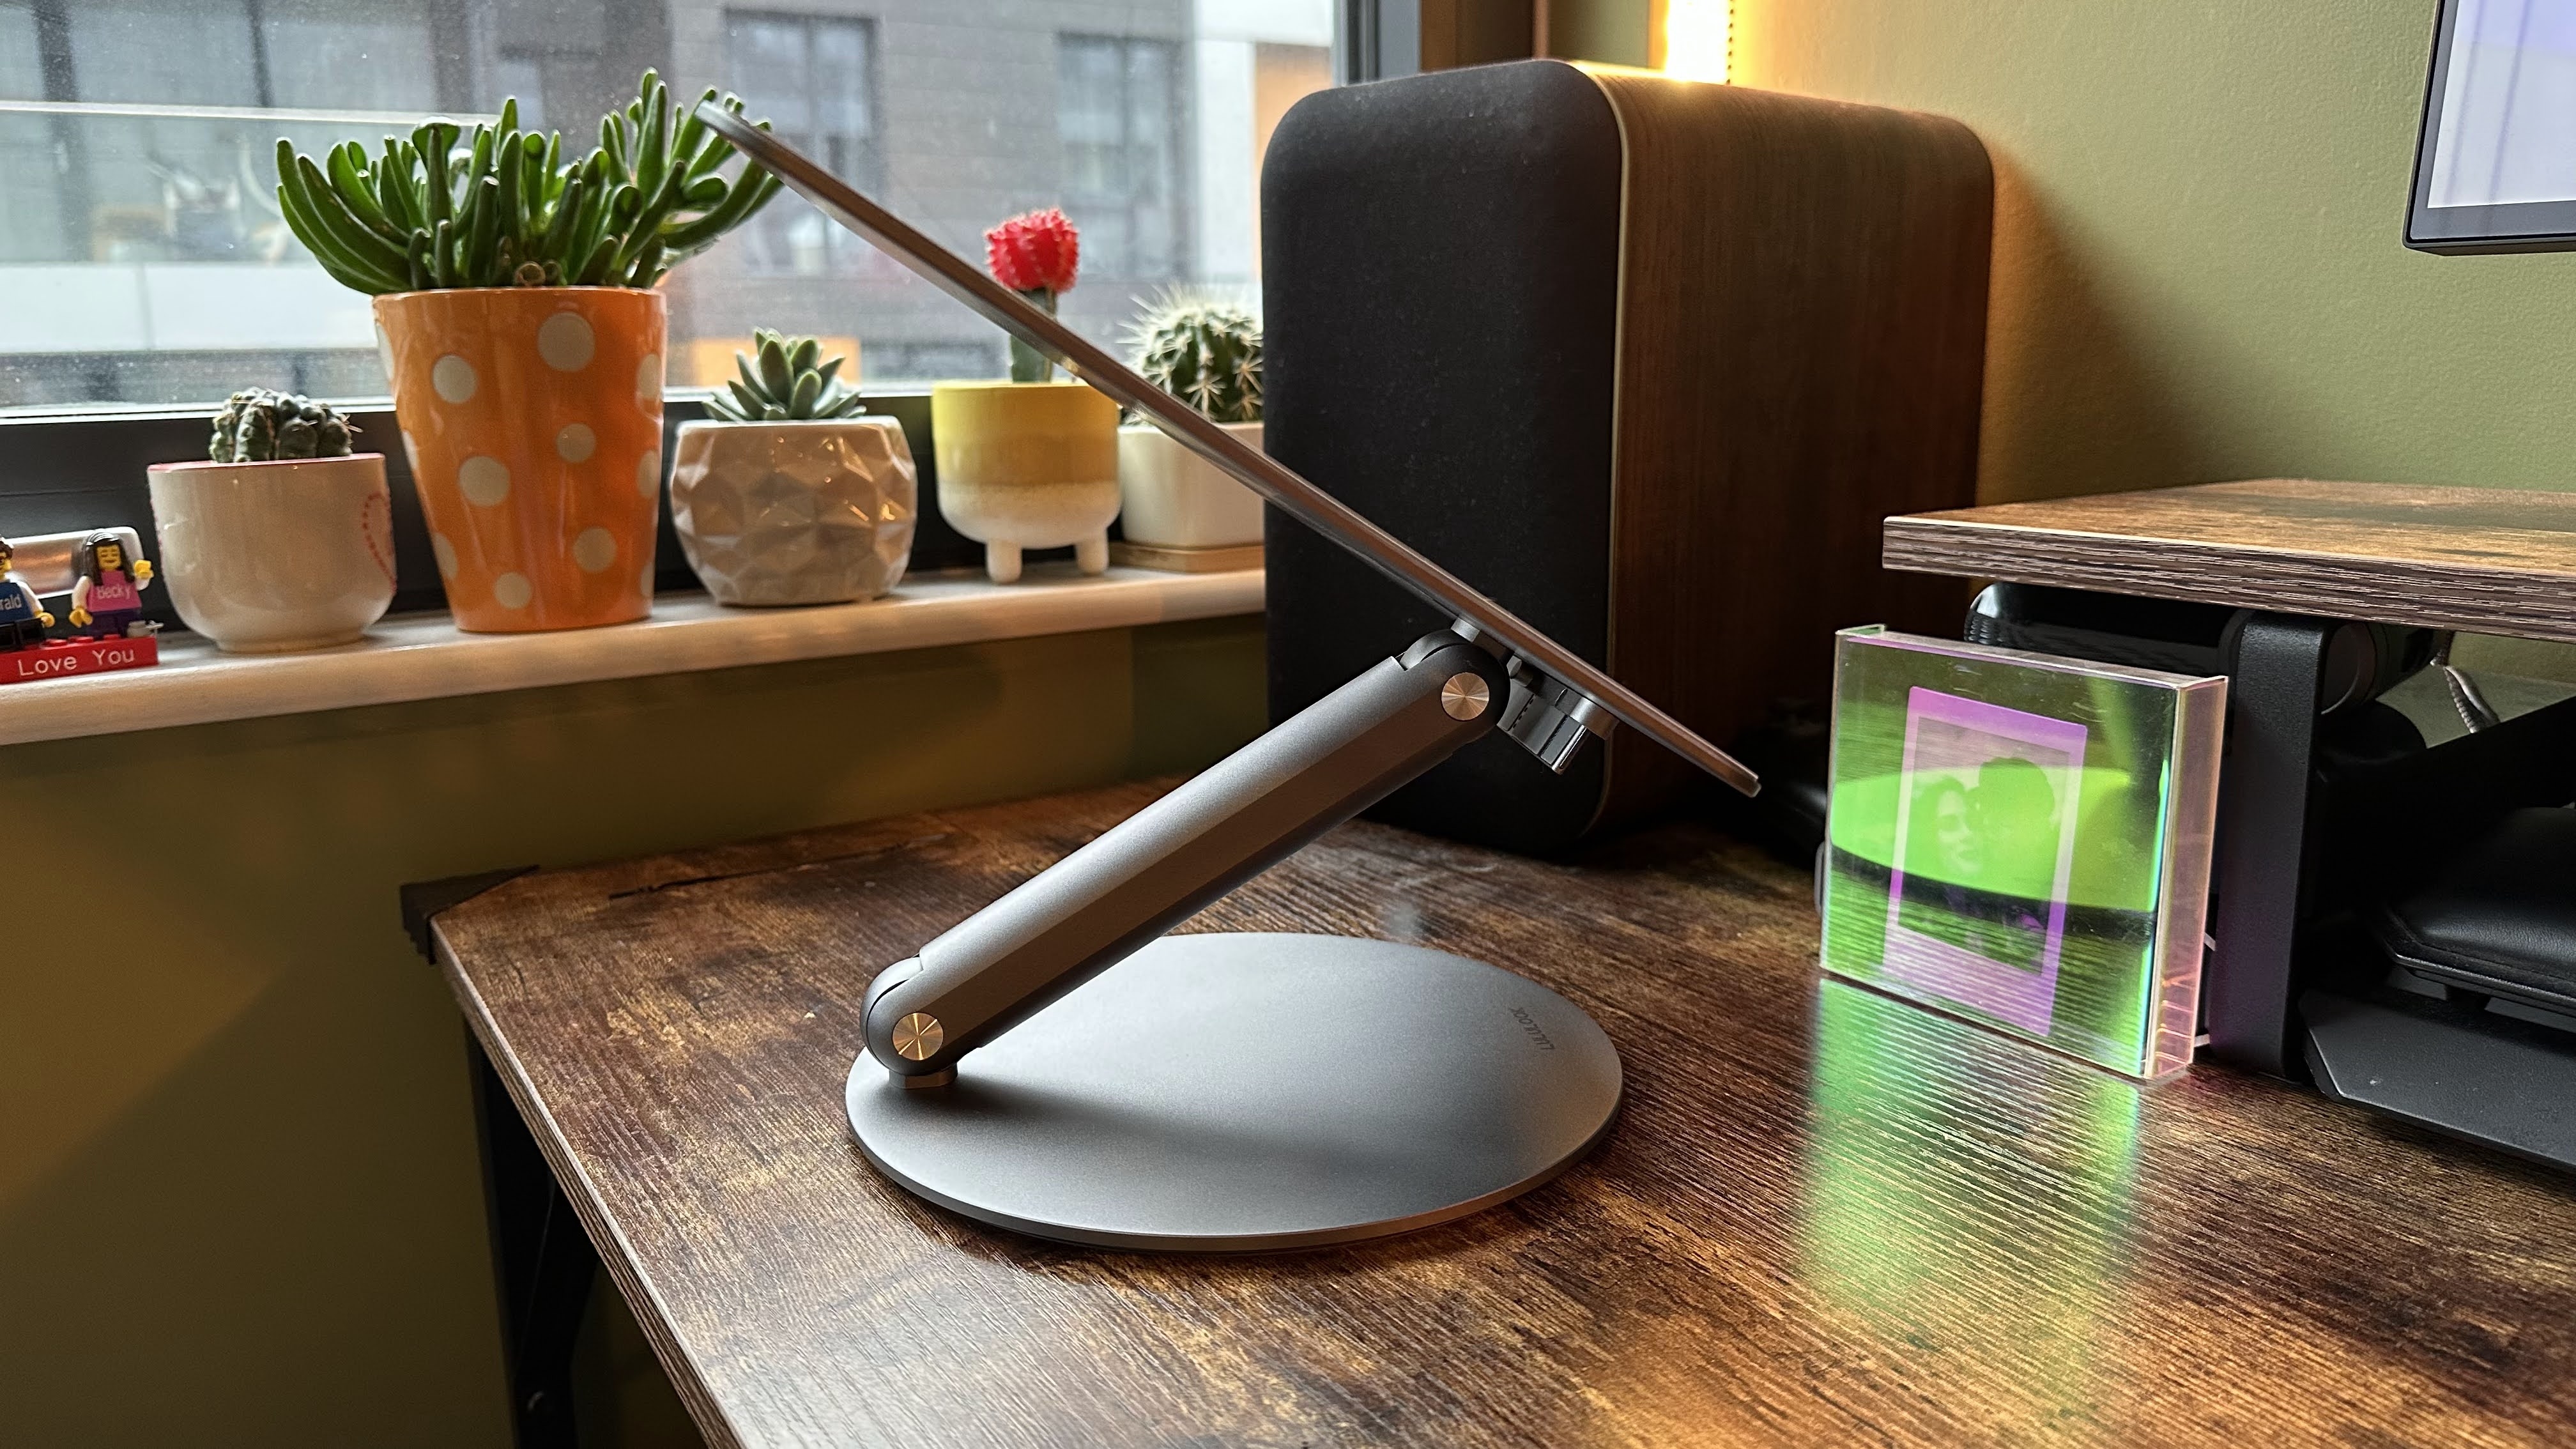 Lululook 360 Rotating Foldable Laptop Stand on a wooden desk